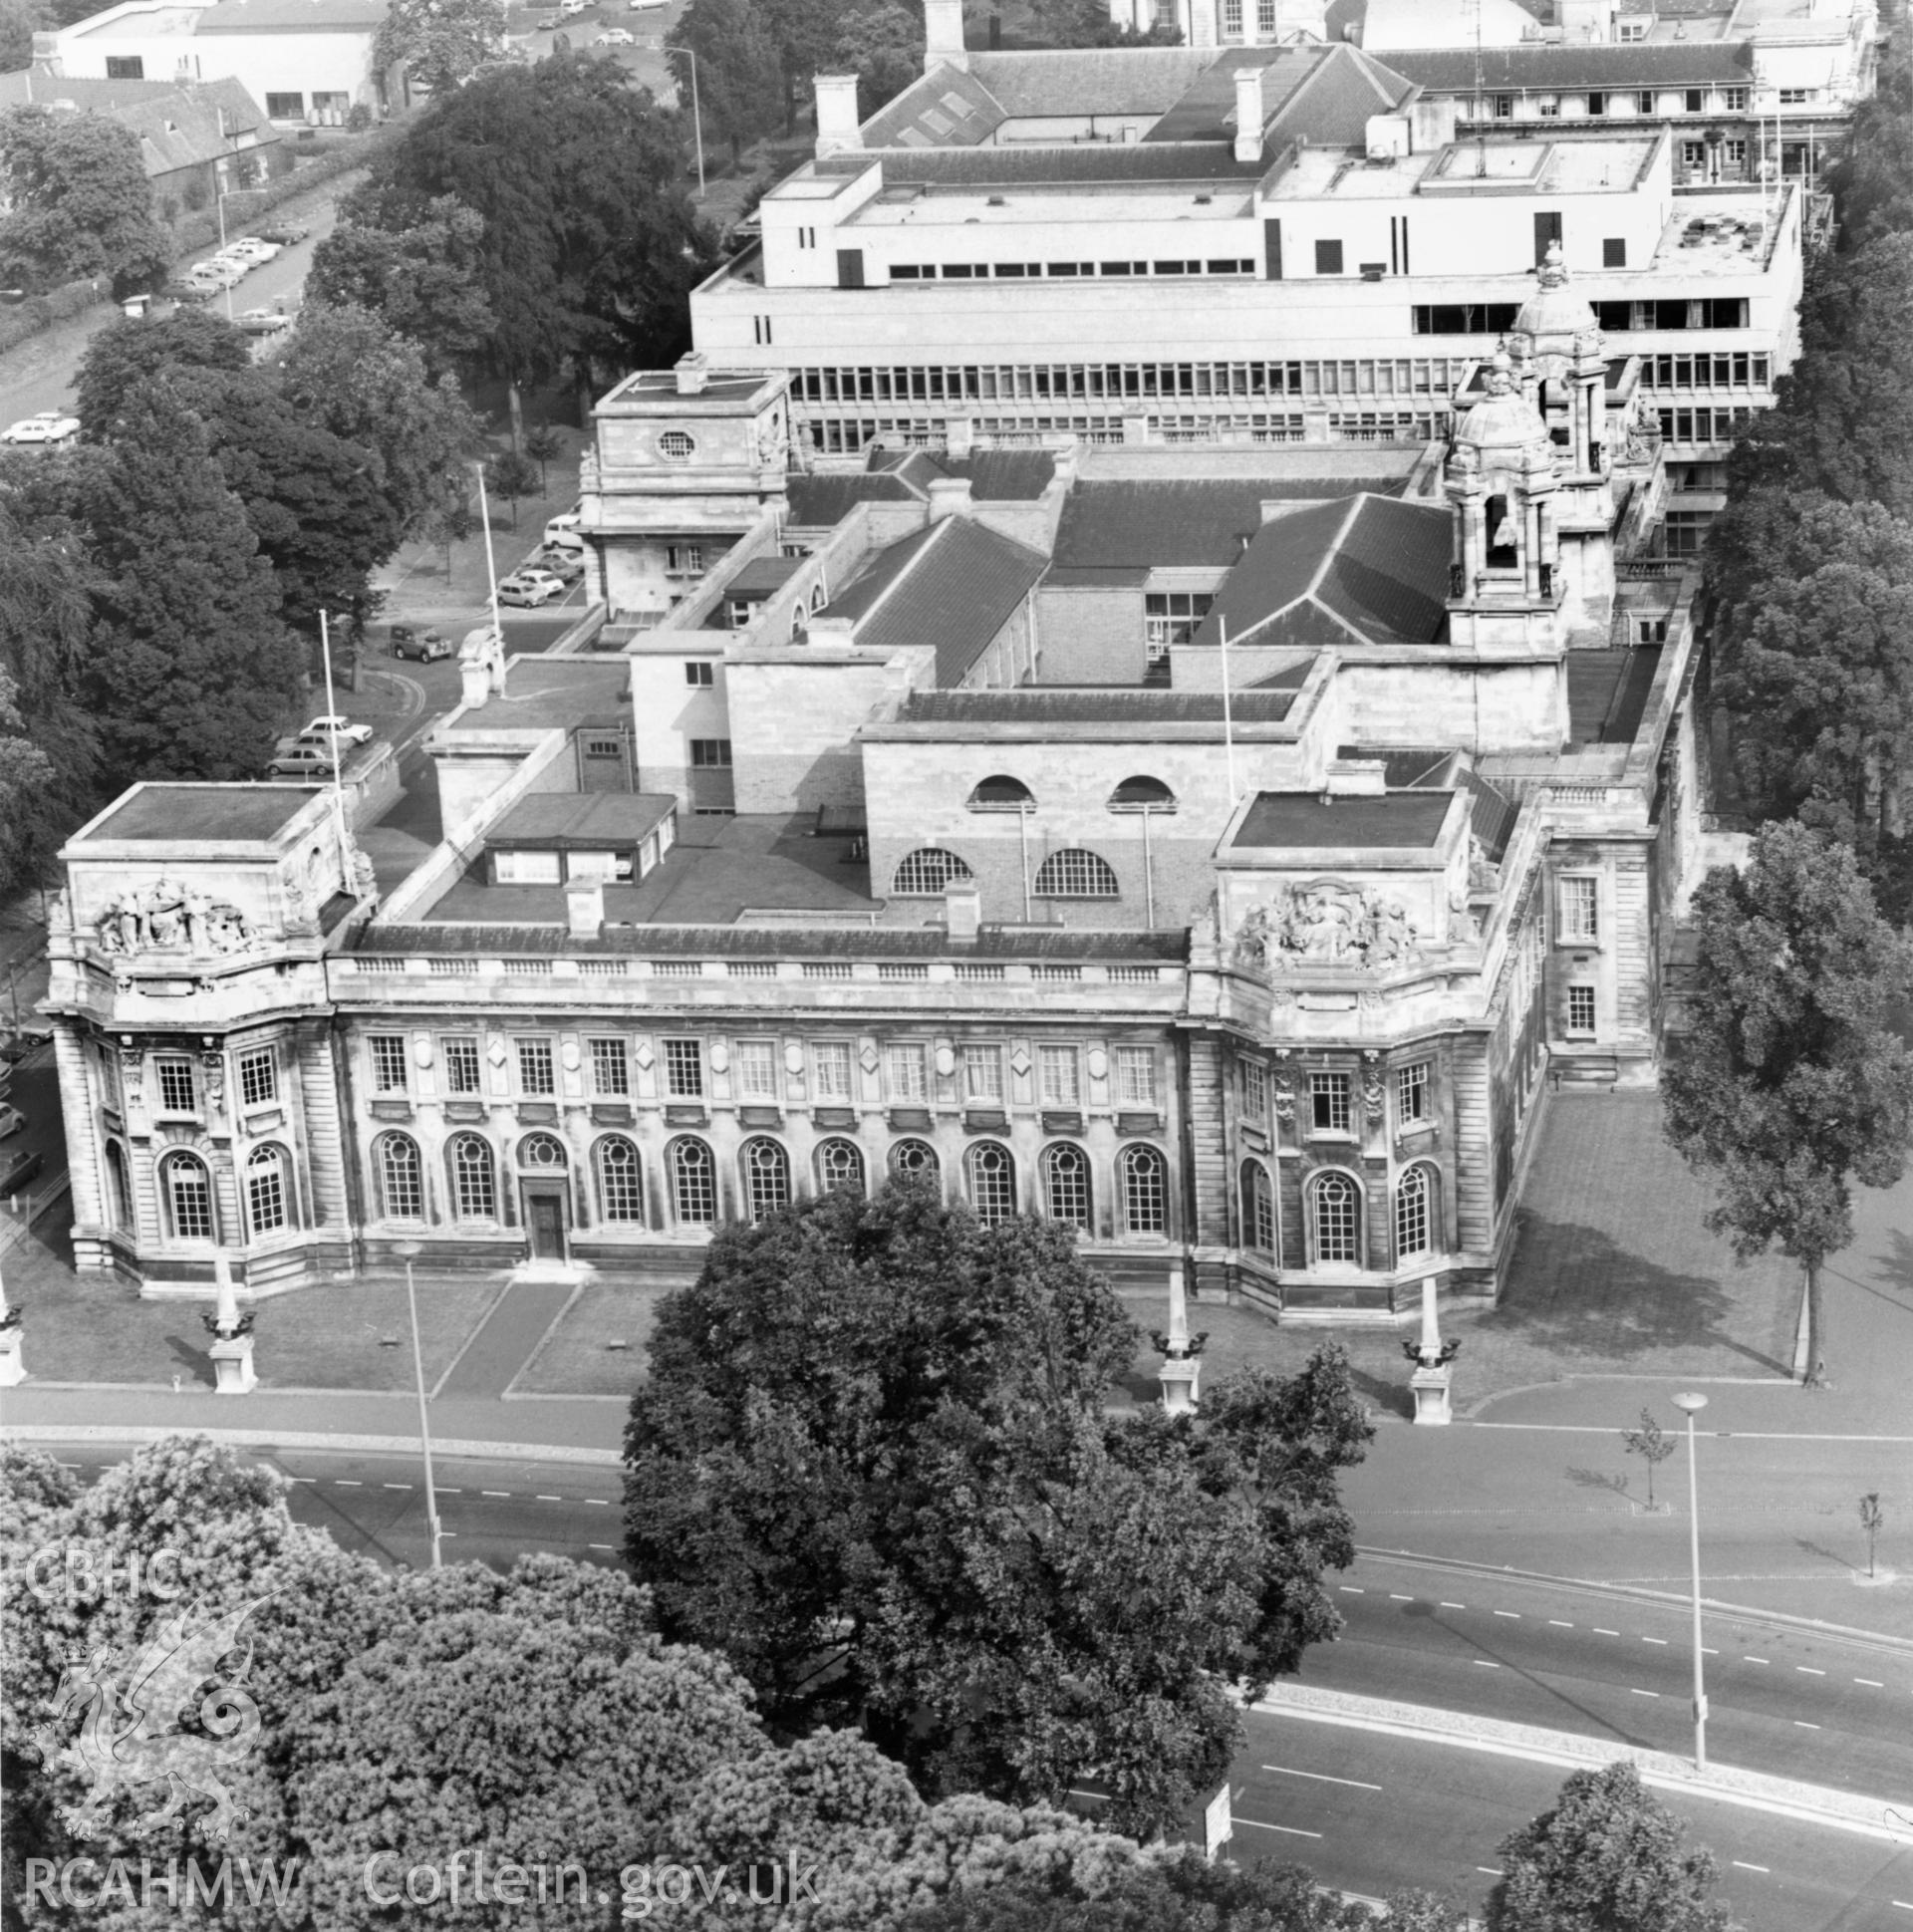 1 b/w print showing view of the Civic Centre, Cardiff; collated by the former Central Office of Information.